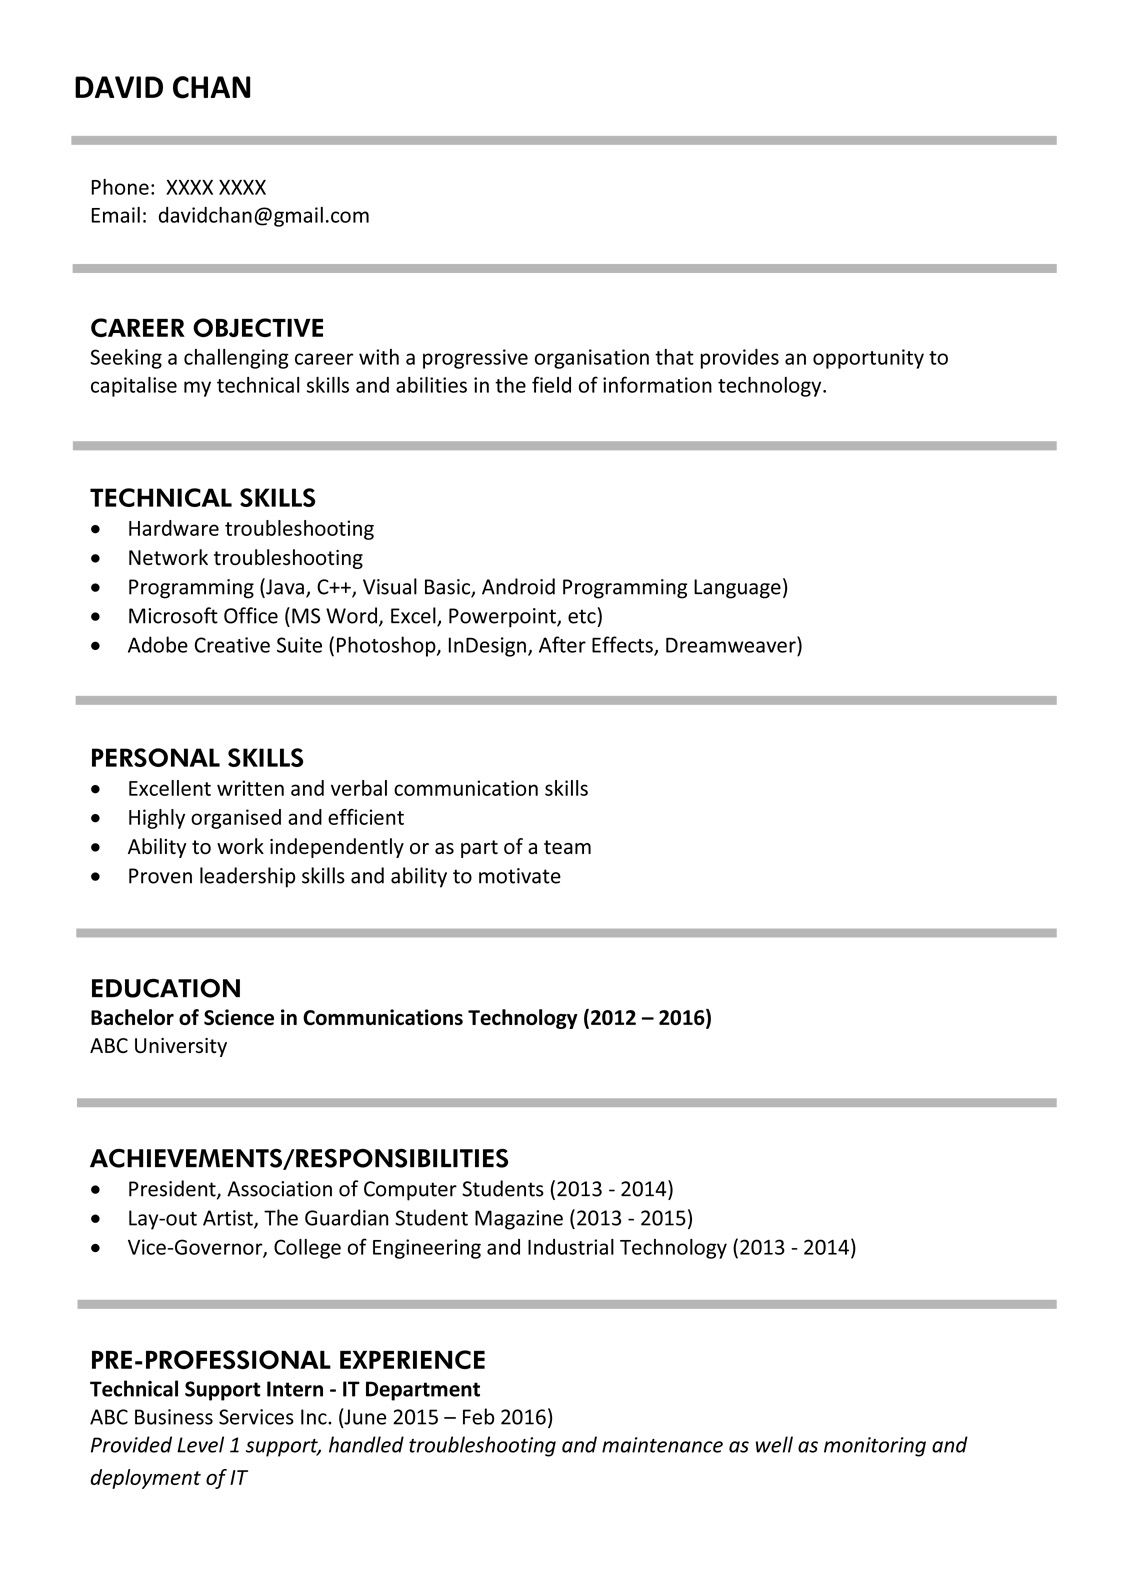 Hong Kong Cover Letter Template Resume Templates Sample within dimensions 1125 X 1592